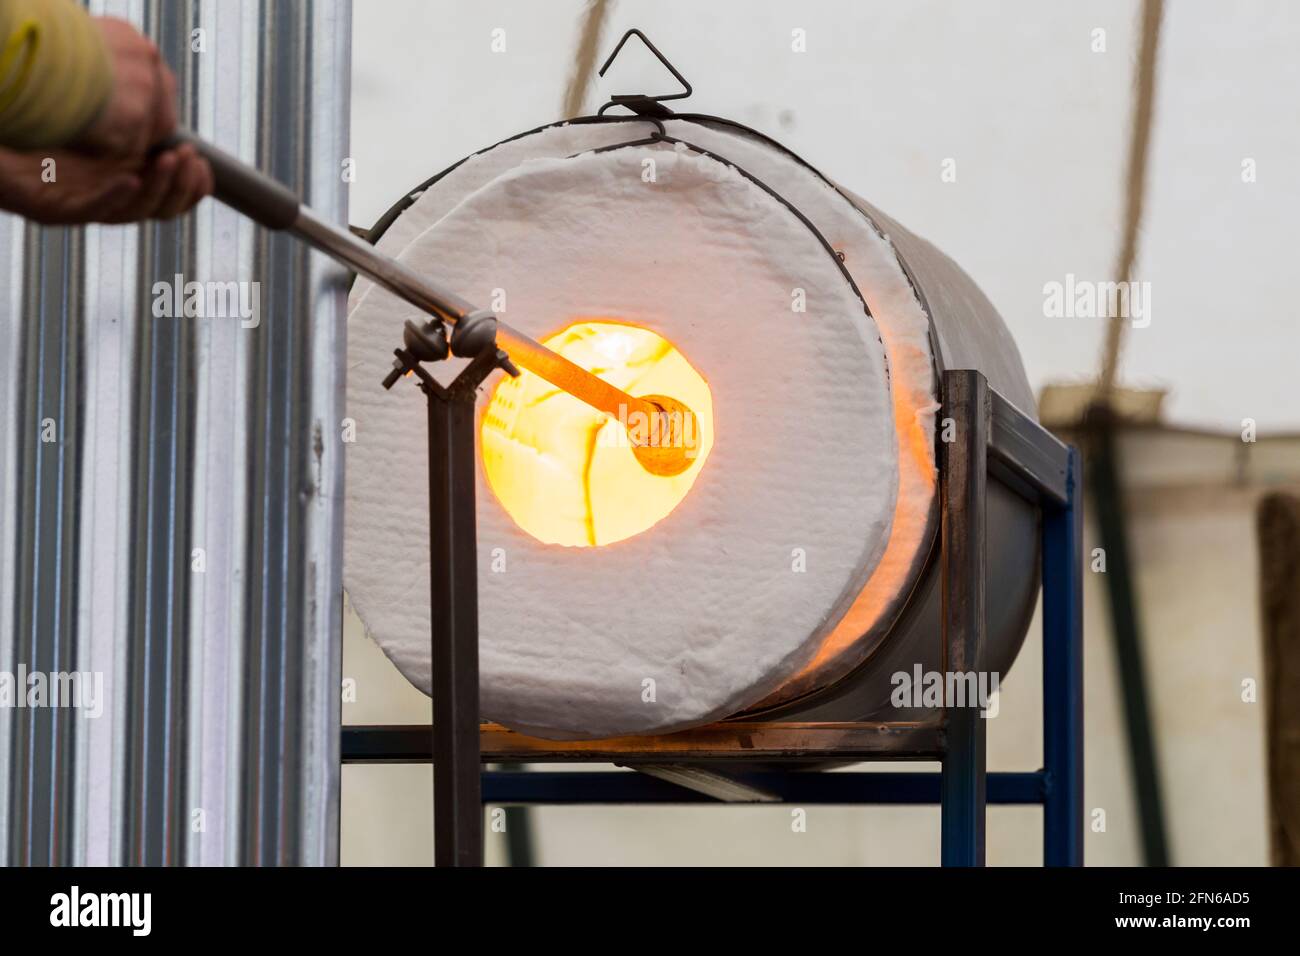 A glass blower uses a glory hole gas furnace to heat the glass gather on  the blowpipe  blow pipe  blow tube  blowtube and keep it molten before  his blowing